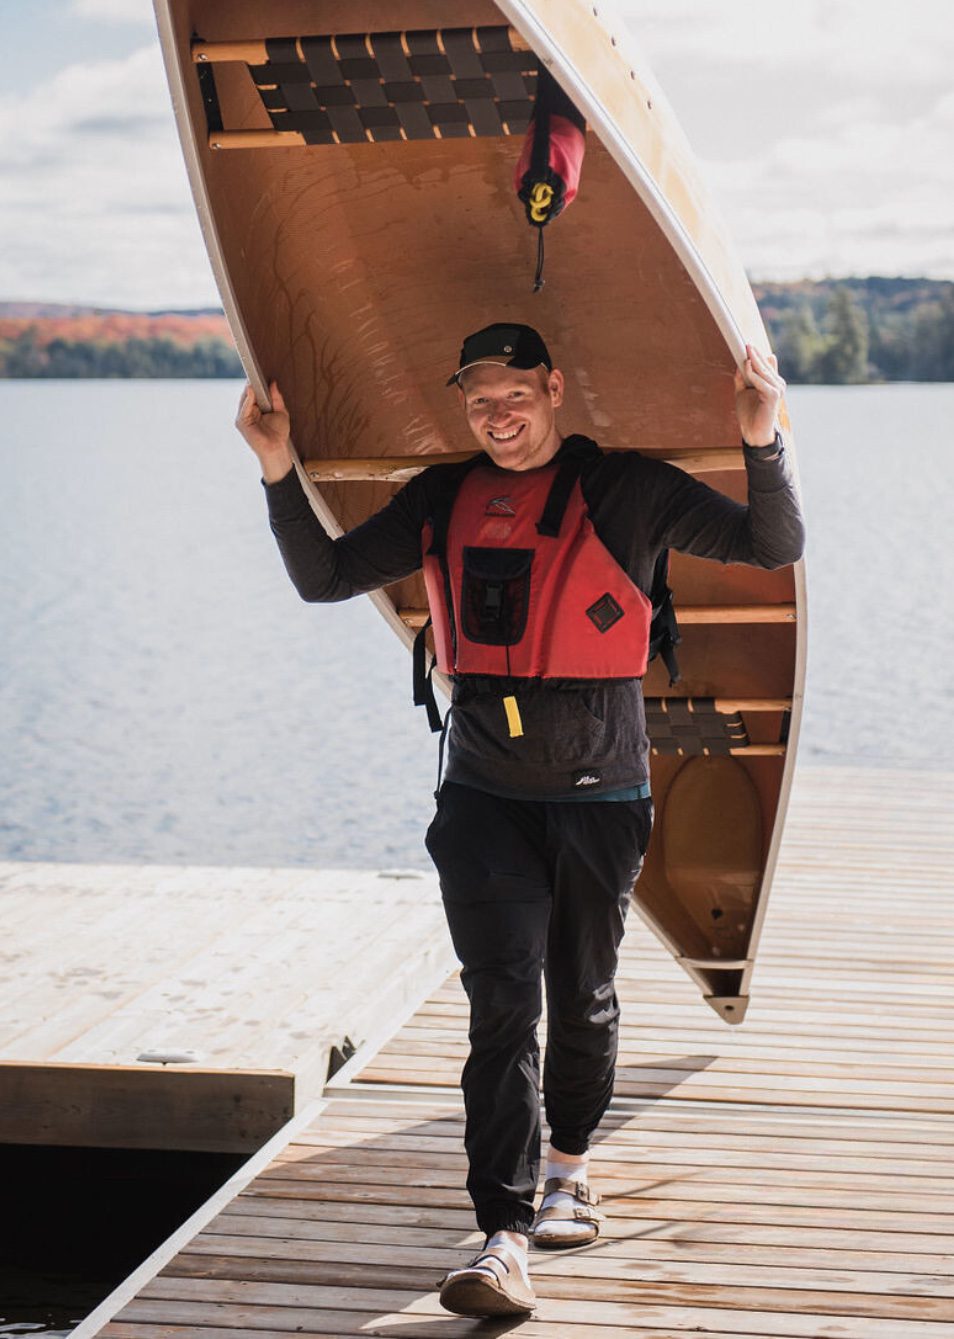 Tim carrying a Canoe